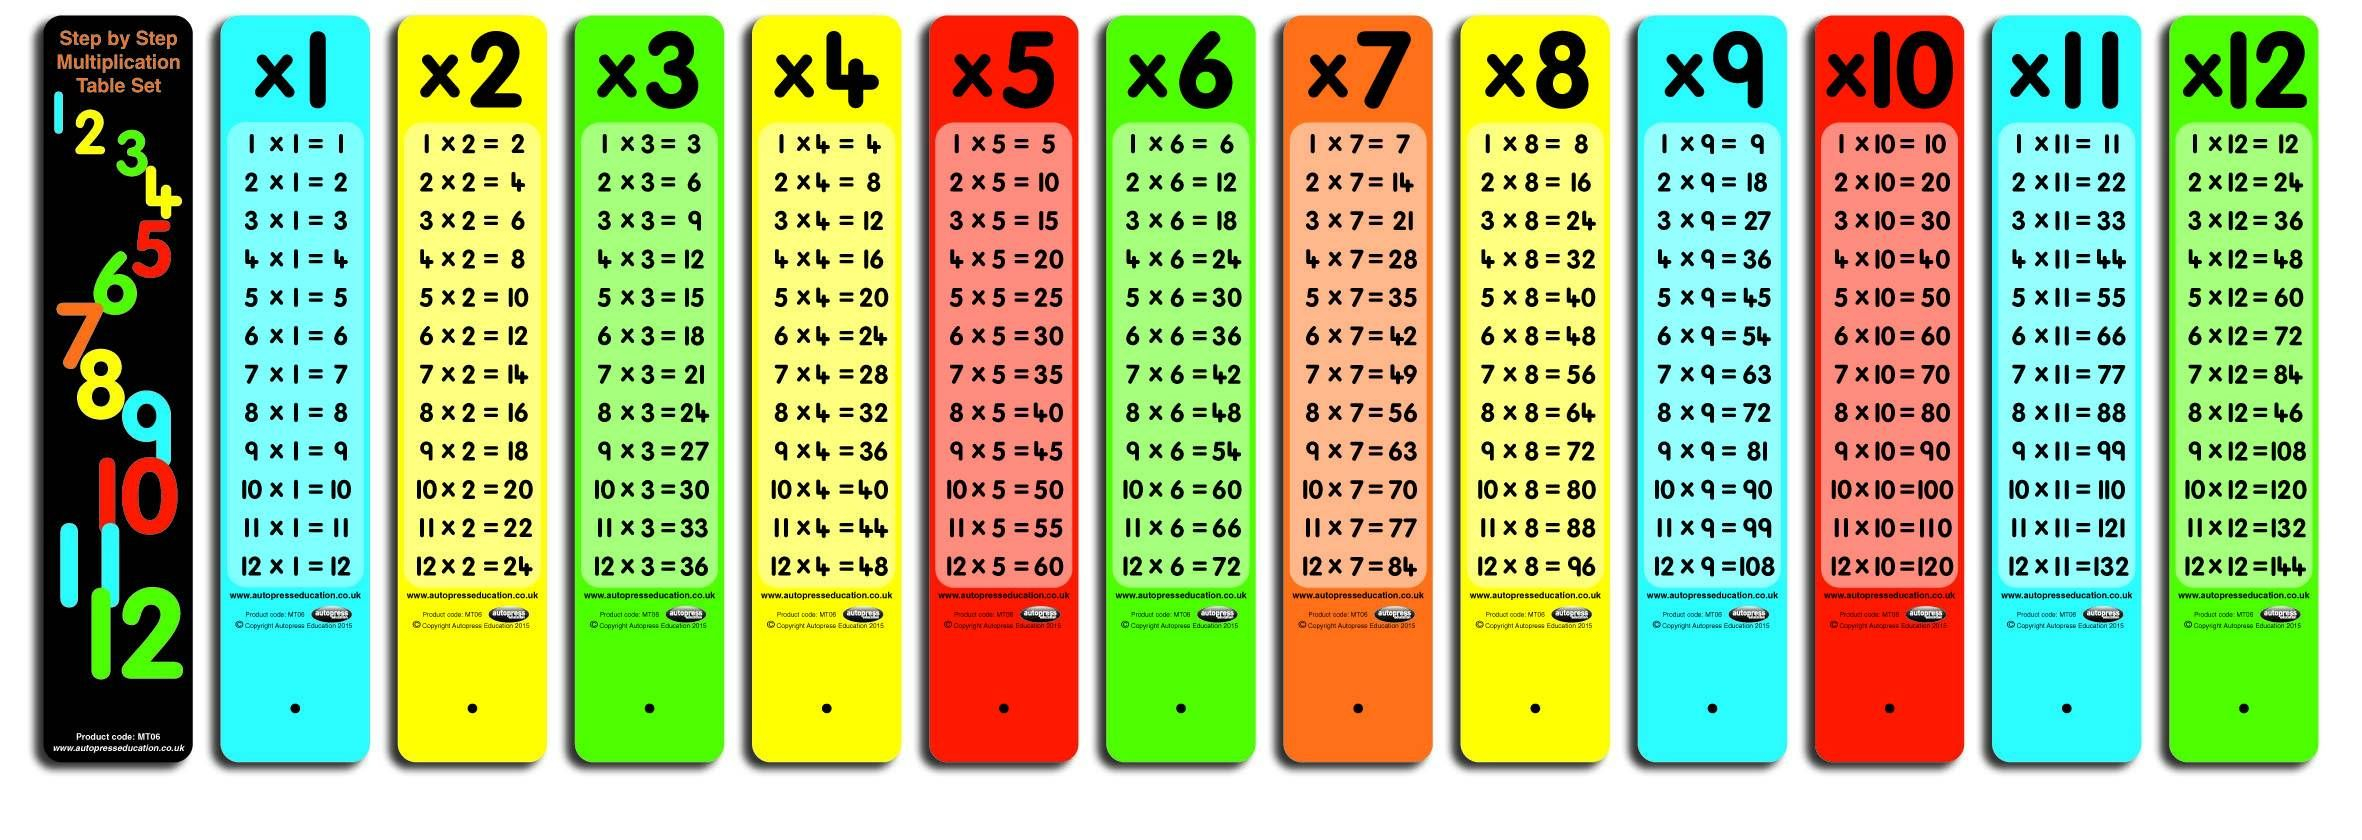 Multiplication Table Multiplication Periodic Table